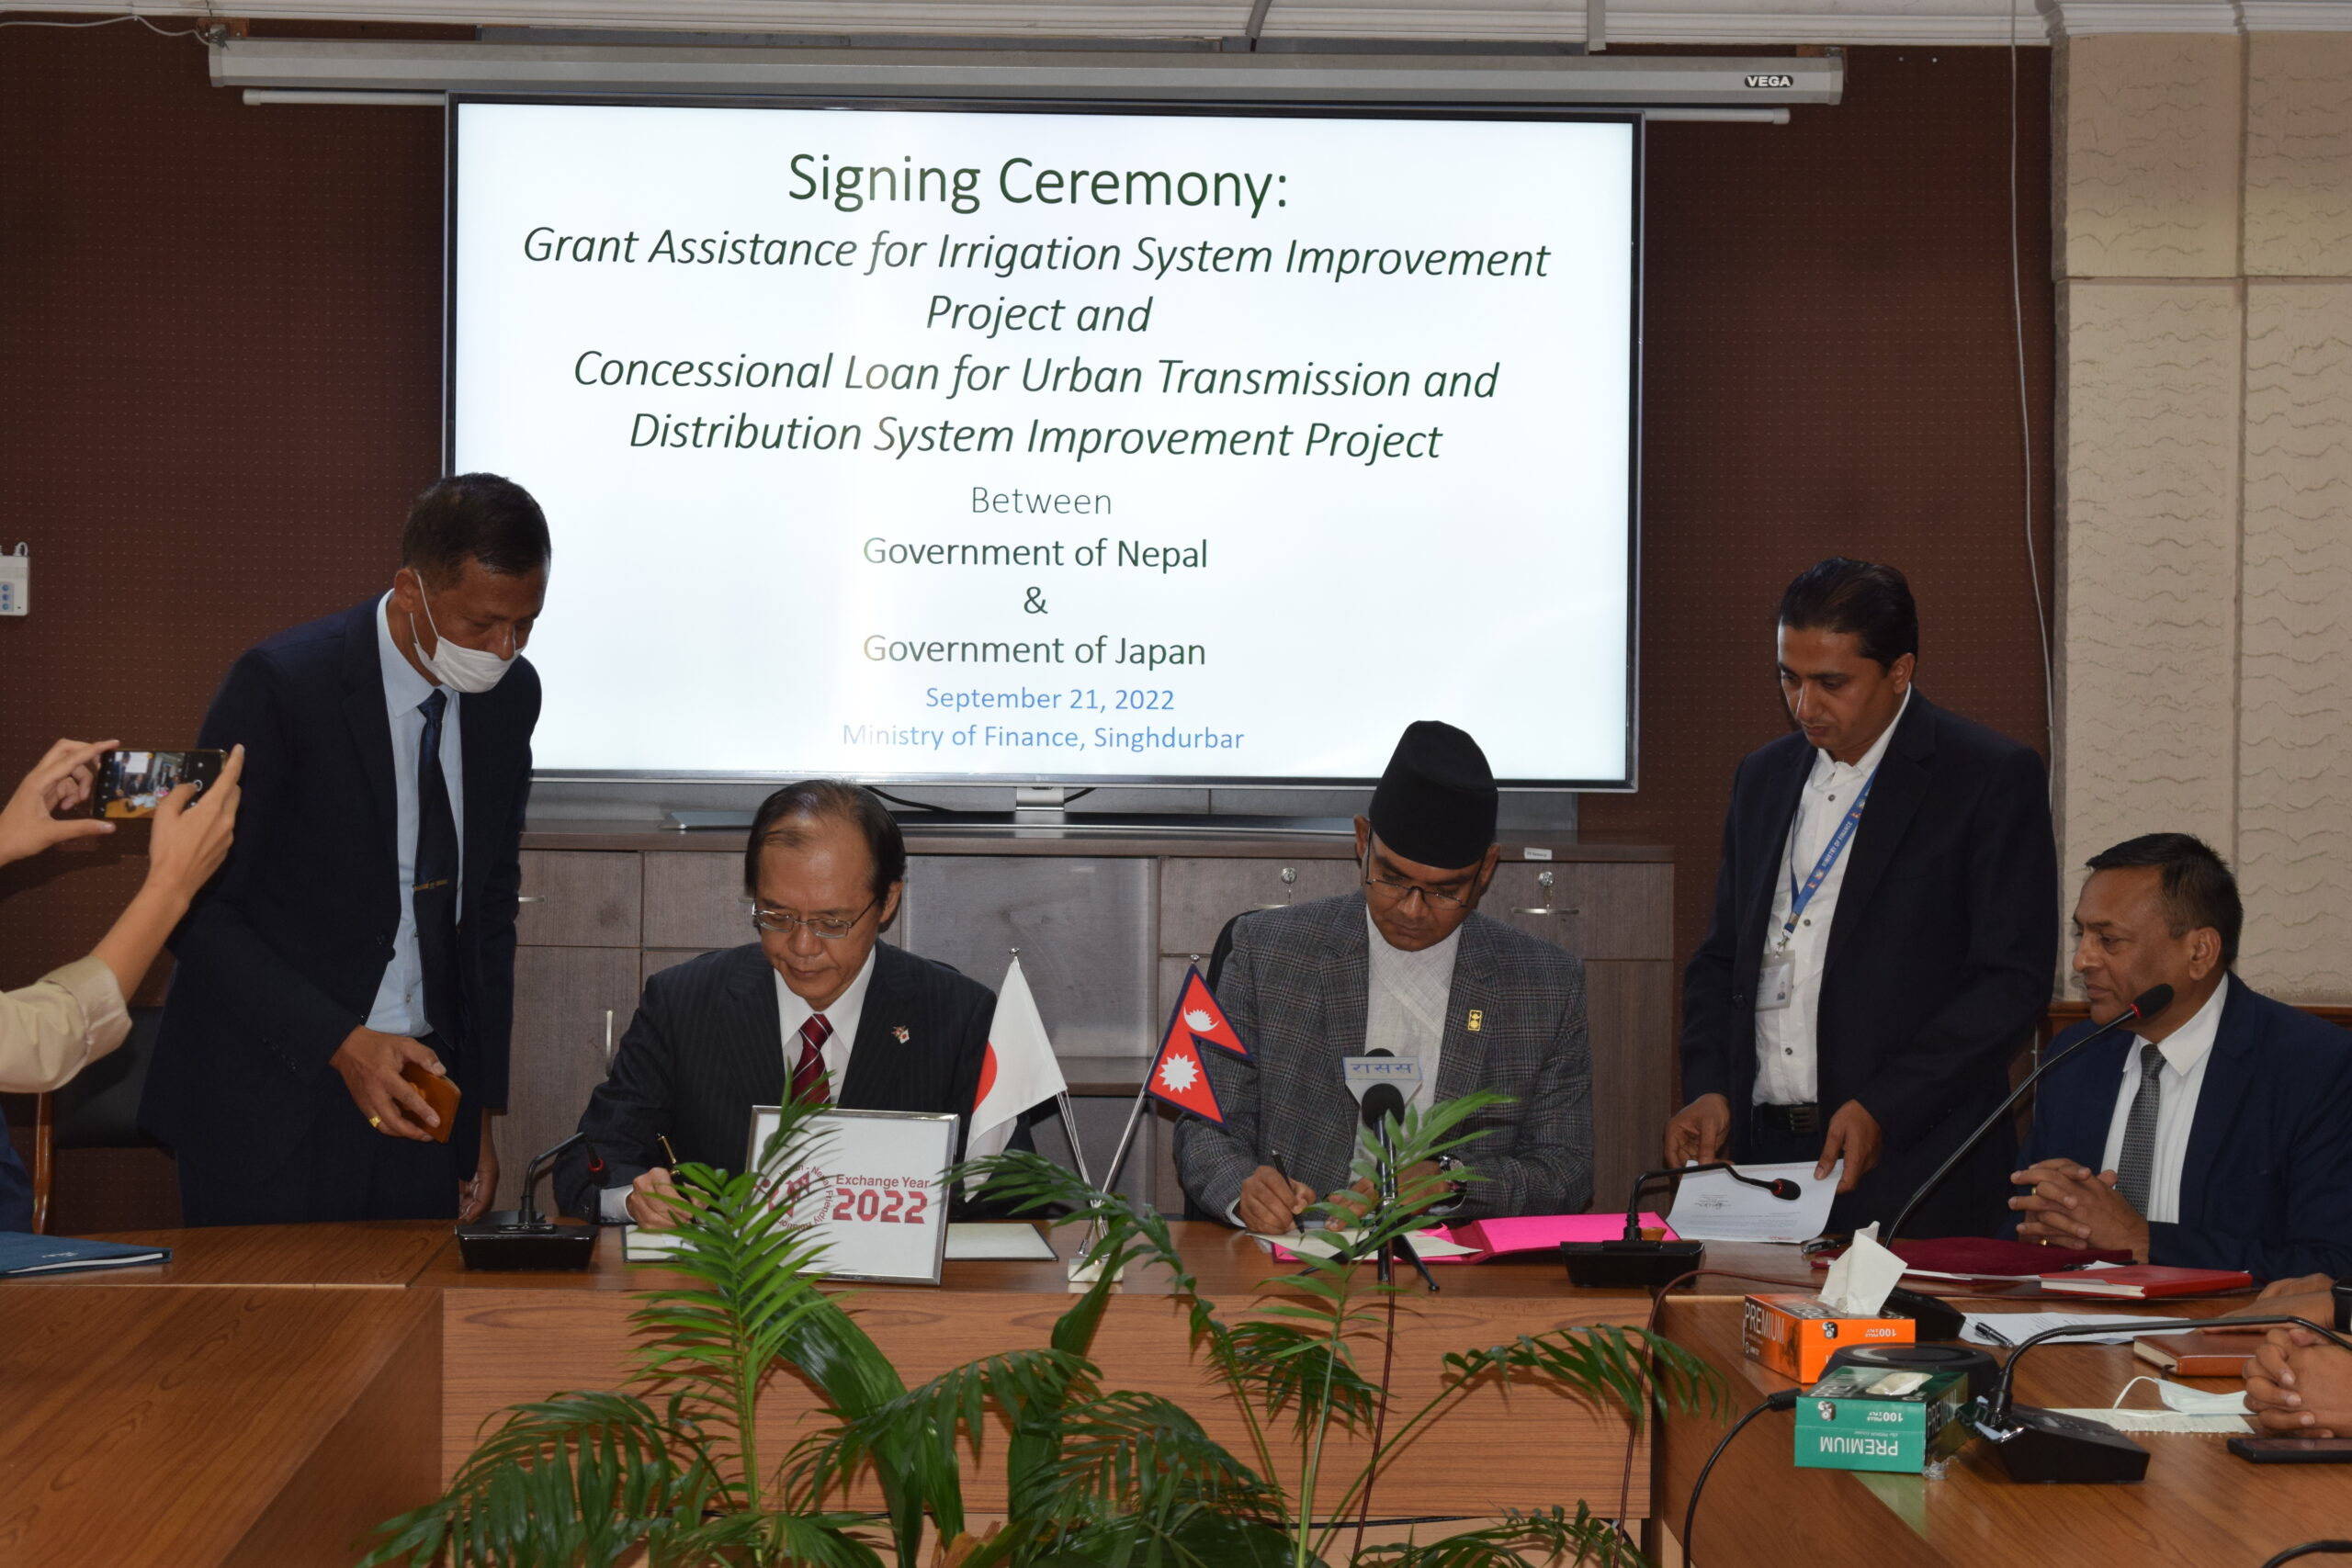 Nepal & Japan signed two agreements for improving Terai irrigation system & urban transmission distribution system